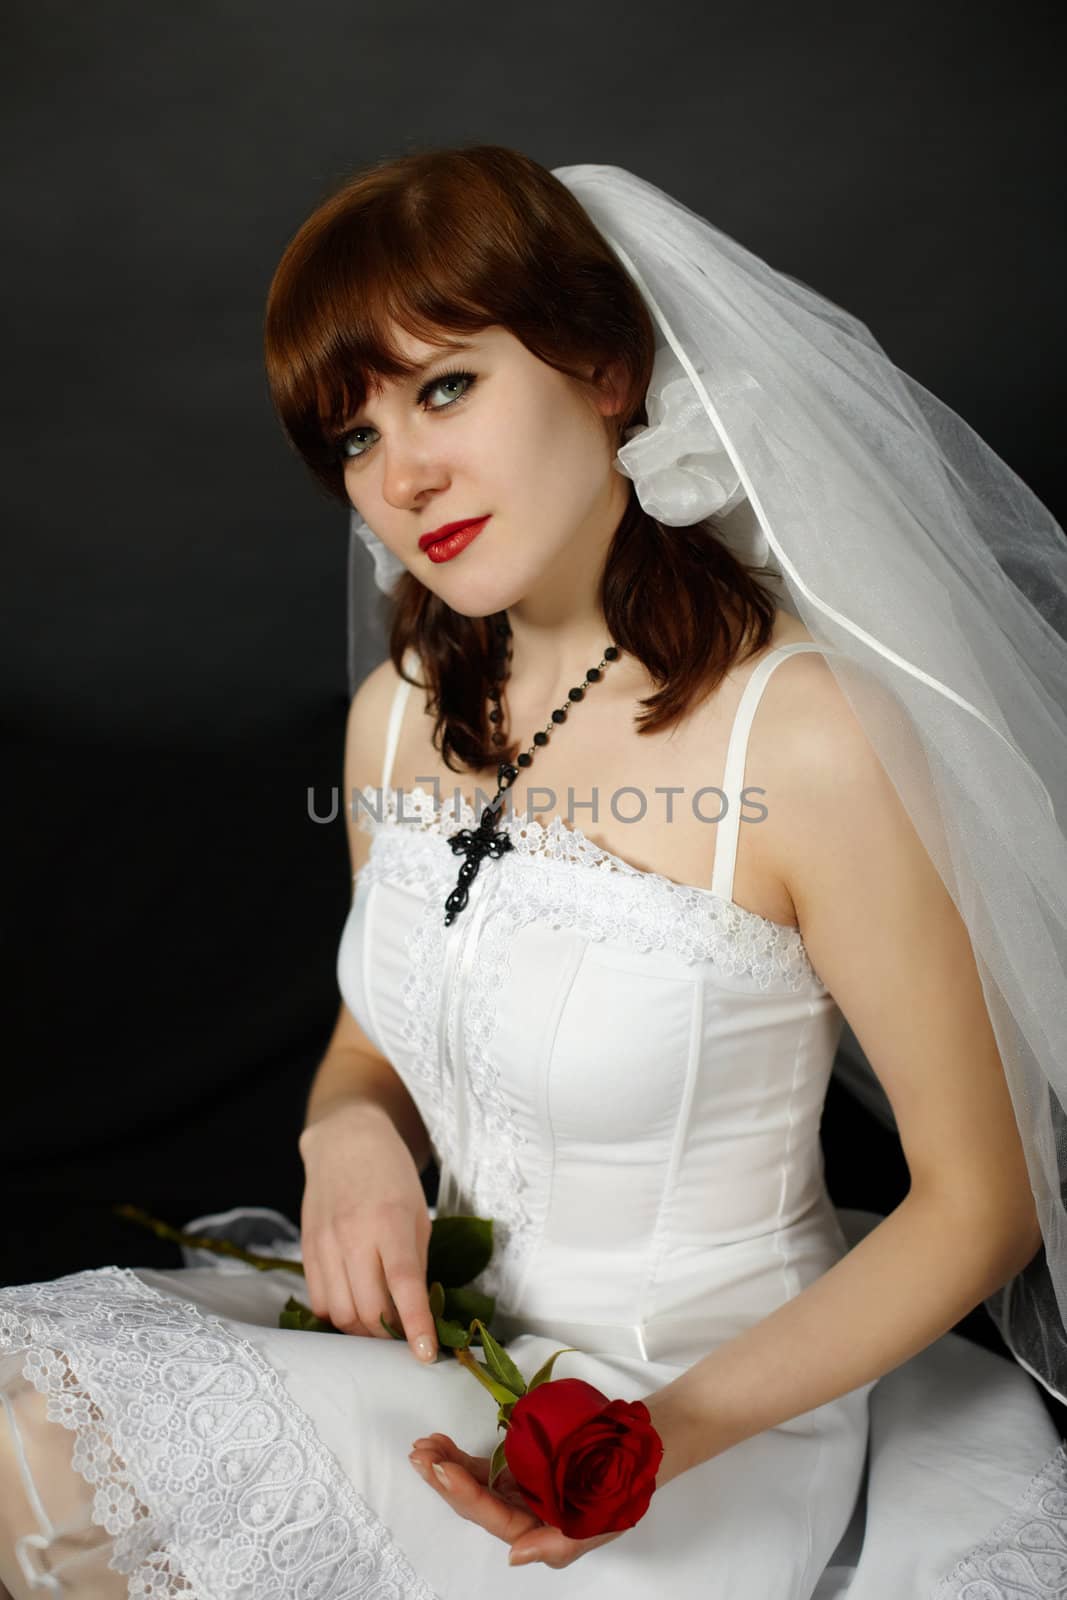 A beautiful young woman in a veil with a rose in hand